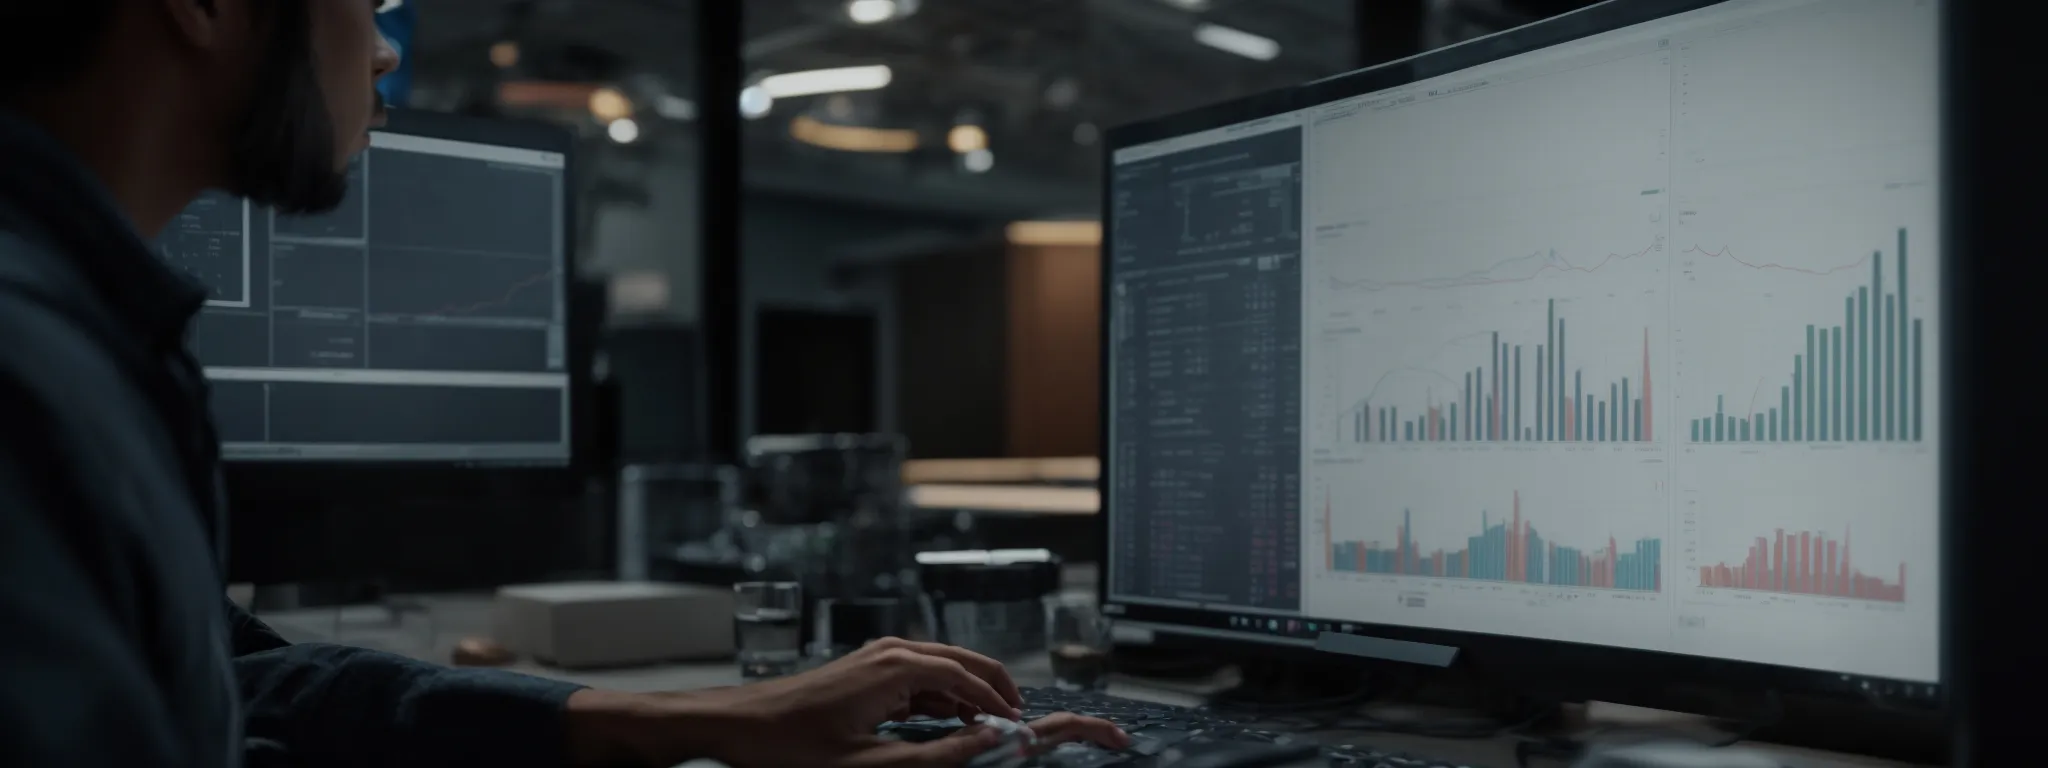 a focused individual analyzes charts and graphs on a computer screen, indicative of seo performance metrics.